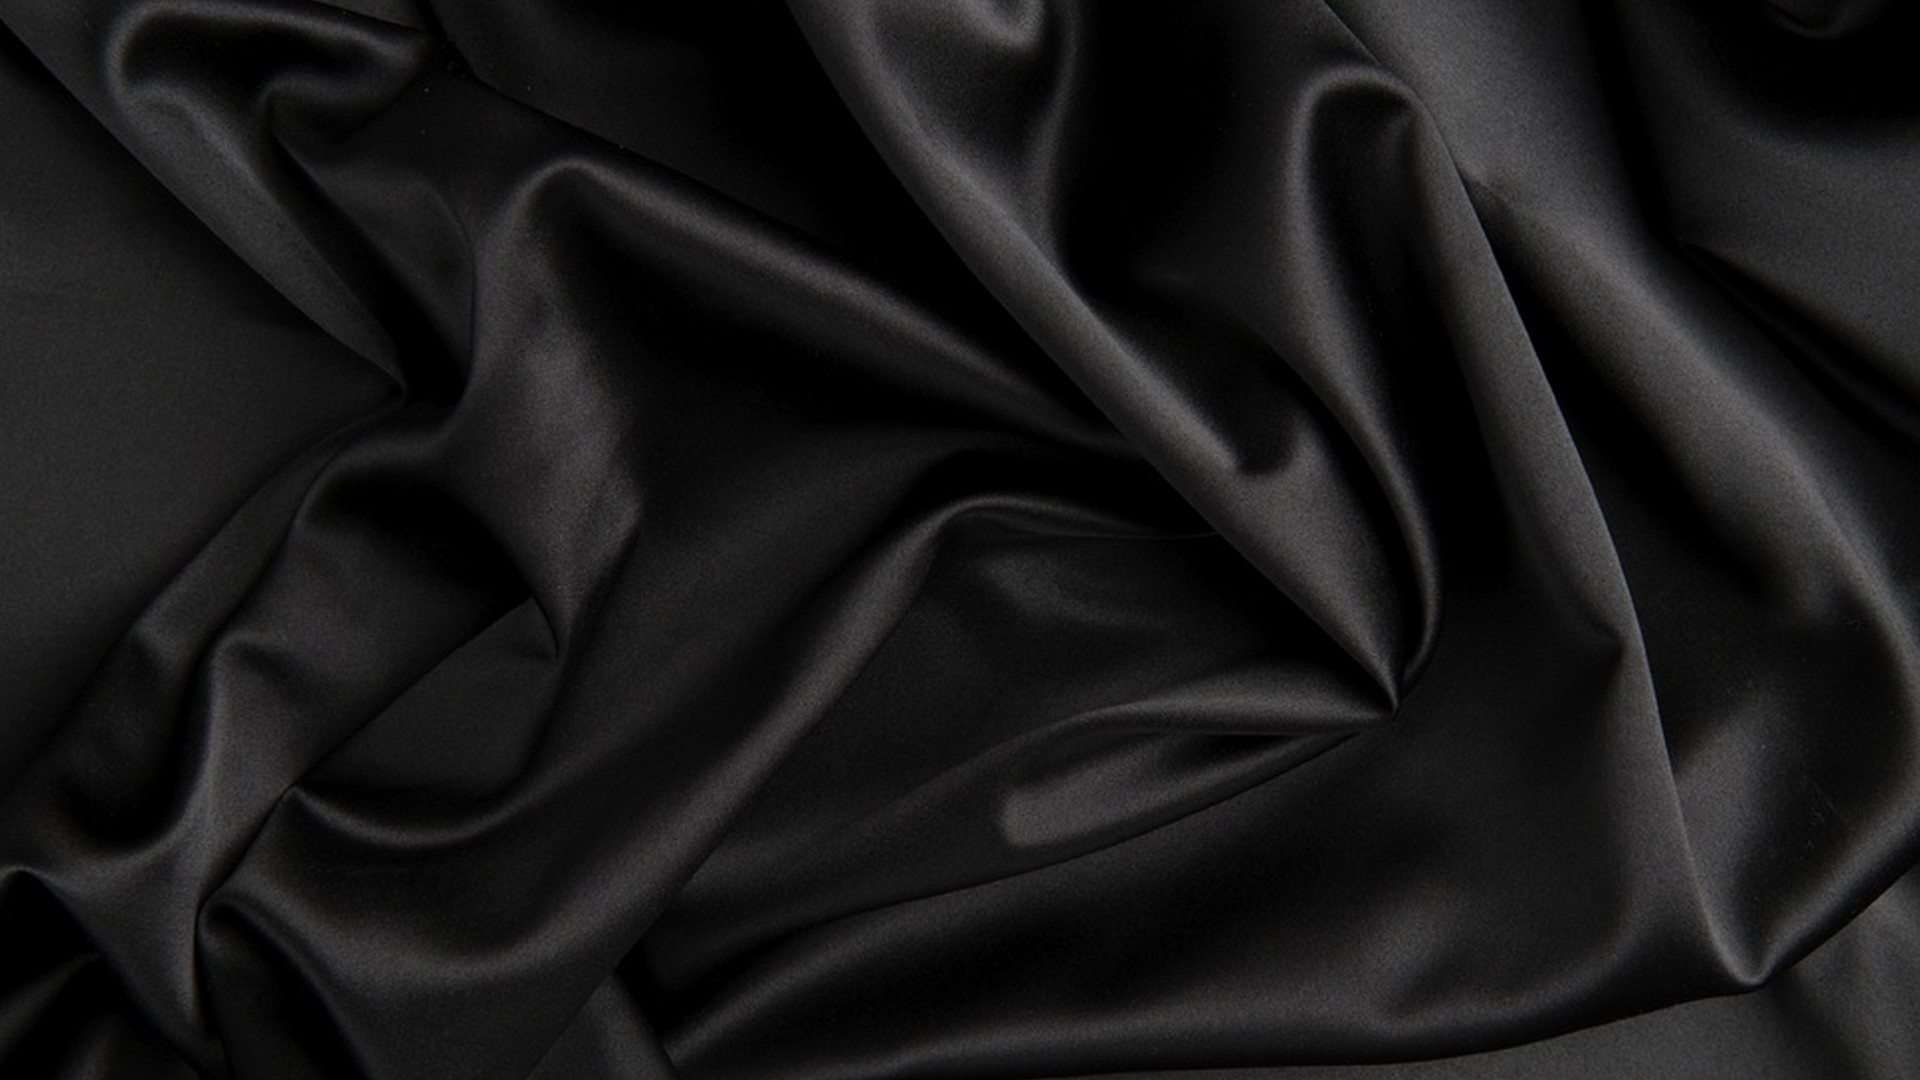 Black Silk iPhone 8 Wallpaper with high-resolution 1920x1080 pixel. You can use this wallpaper for your iPhone 5, 6, 7, 8, X, XS, XR backgrounds, Mobile Screensaver, or iPad Lock Screen